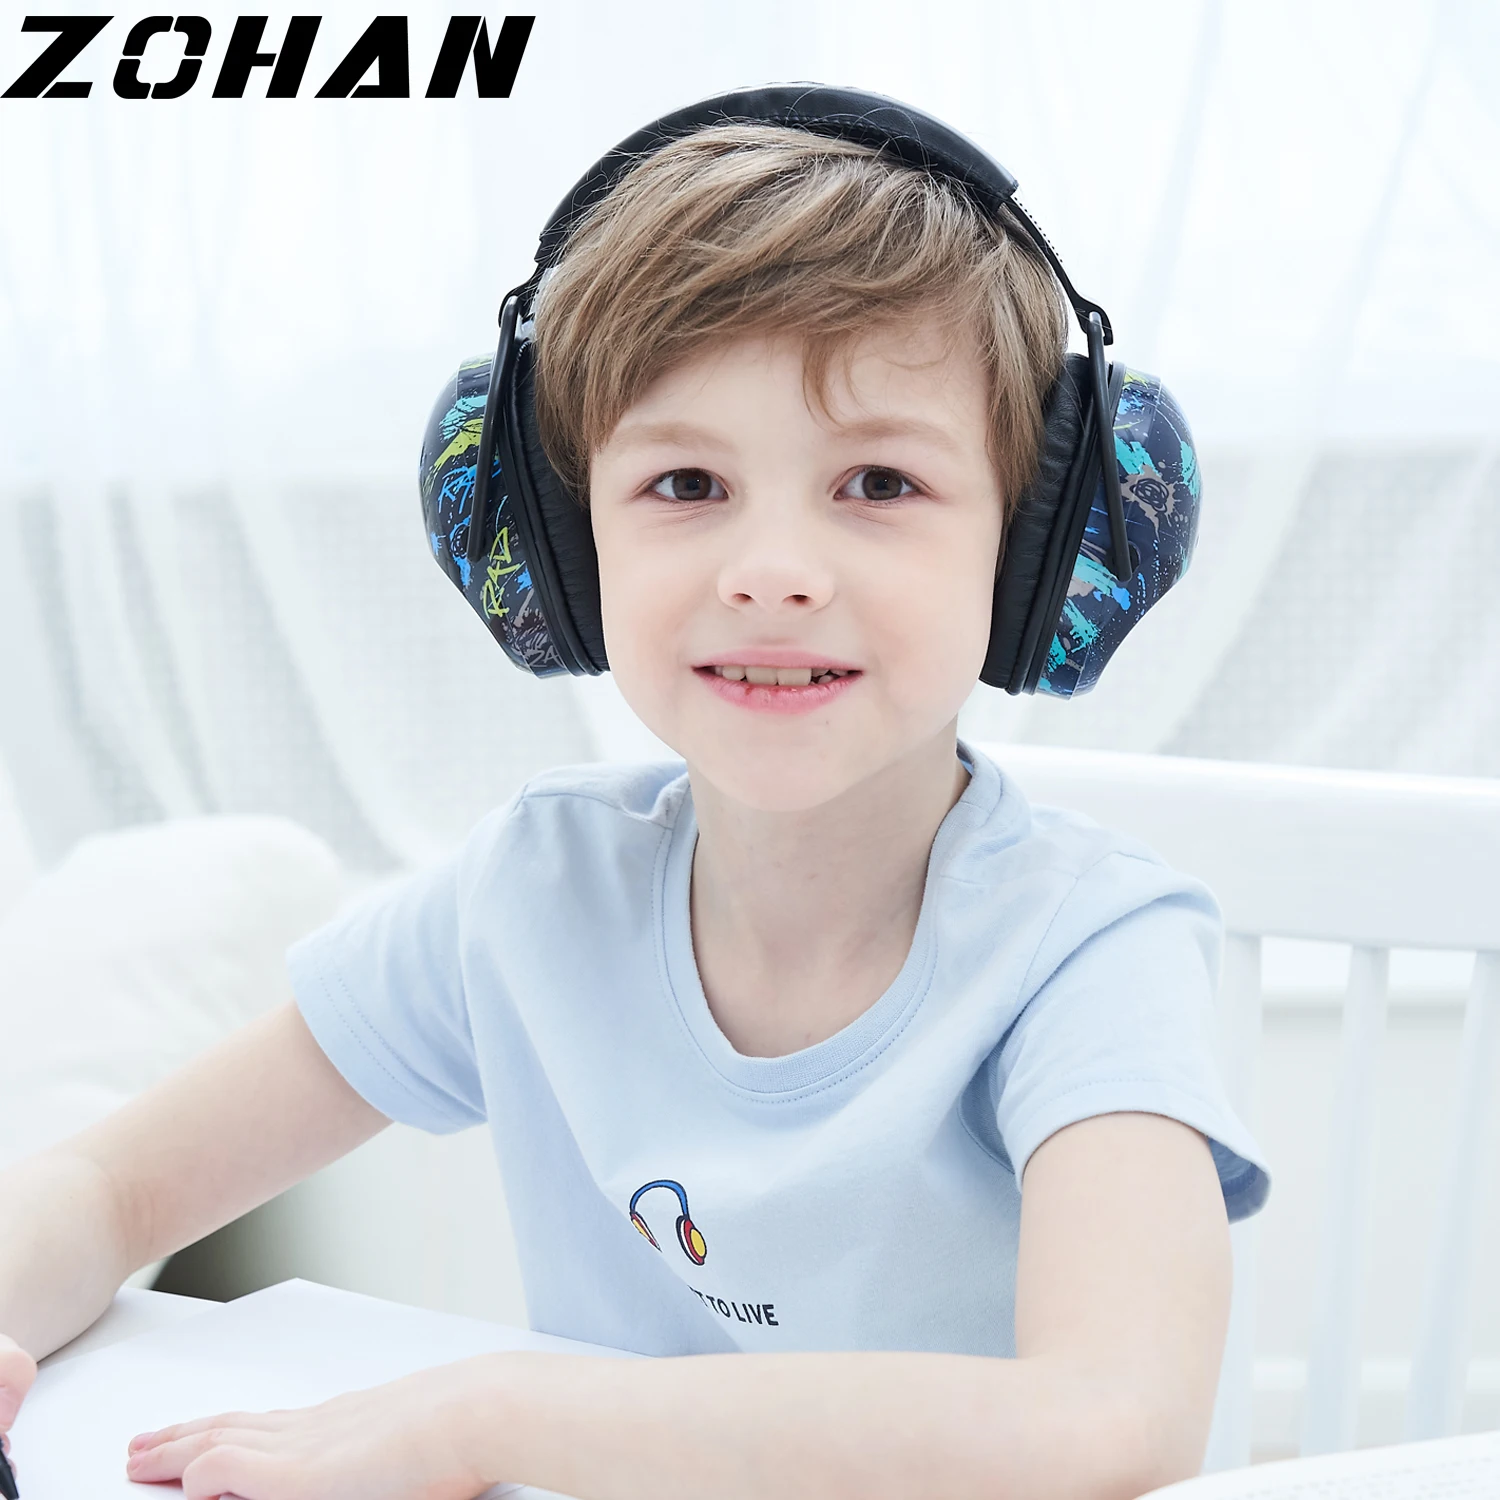 ZOHAN Kids Ear Protection Safety Ear Muffs Noise Reduction Ear Defenders Best Hearing Protectors for toddler girls boys NRR 22dB